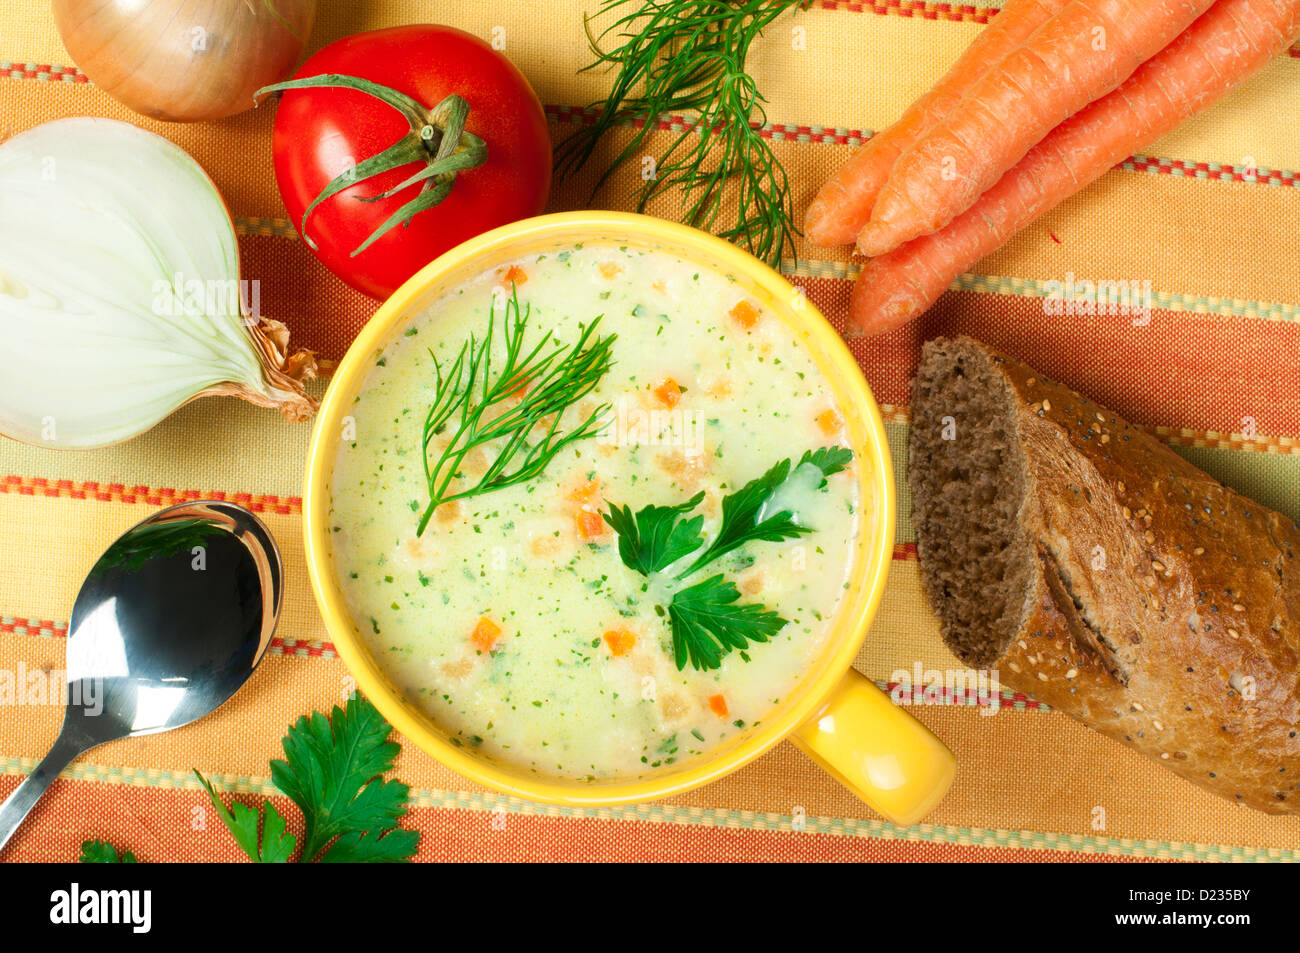 Chicken Cream Soup. Spoon and bread on the table Stock Photo